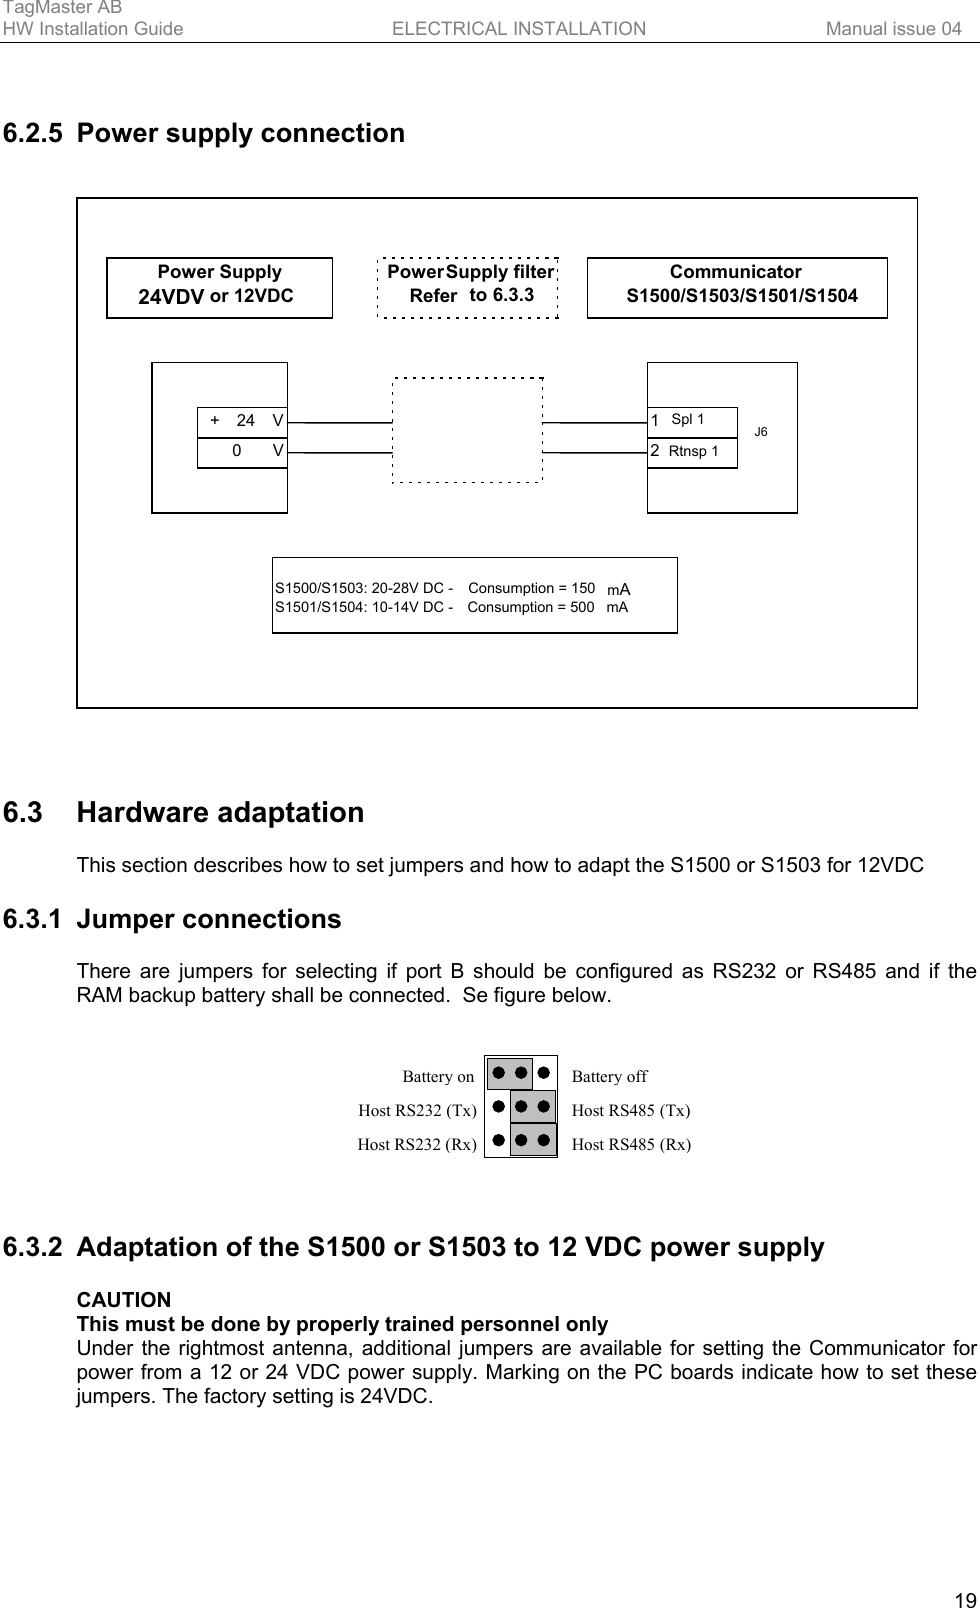 TagMaster AB     HW Installation Guide  ELECTRICAL INSTALLATION  Manual issue 04  19  6.2.5  Power supply connection     6.3 Hardware adaptation This section describes how to set jumpers and how to adapt the S1500 or S1503 for 12VDC  6.3.1 Jumper connections There are jumpers for selecting if port B should be configured as RS232 or RS485 and if the RAM backup battery shall be connected.  Se figure below.   Host RS232 (Tx)Host RS232 (Rx)Host RS485 (Tx)Host RS485 (Rx)Battery on Battery off   6.3.2  Adaptation of the S1500 or S1503 to 12 VDC power supply CAUTION This must be done by properly trained personnel only Under the rightmost antenna, additional jumpers are available for setting the Communicator for power from a 12 or 24 VDC power supply. Marking on the PC boards indicate how to set these jumpers. The factory setting is 24VDC. + 24 V 0 V  2  Rtnsp 11Spl 1J6 S1500/S1503: 20-28V DC -  Consumption = 150  mAS1501/S1504: 10-14V DC -  Consumption = 500  mAPower Supply 24VDV or 12VDC Power Supply  filterRefer  to 6.3.3Communicator S1500/S1503/S1501/S1504 